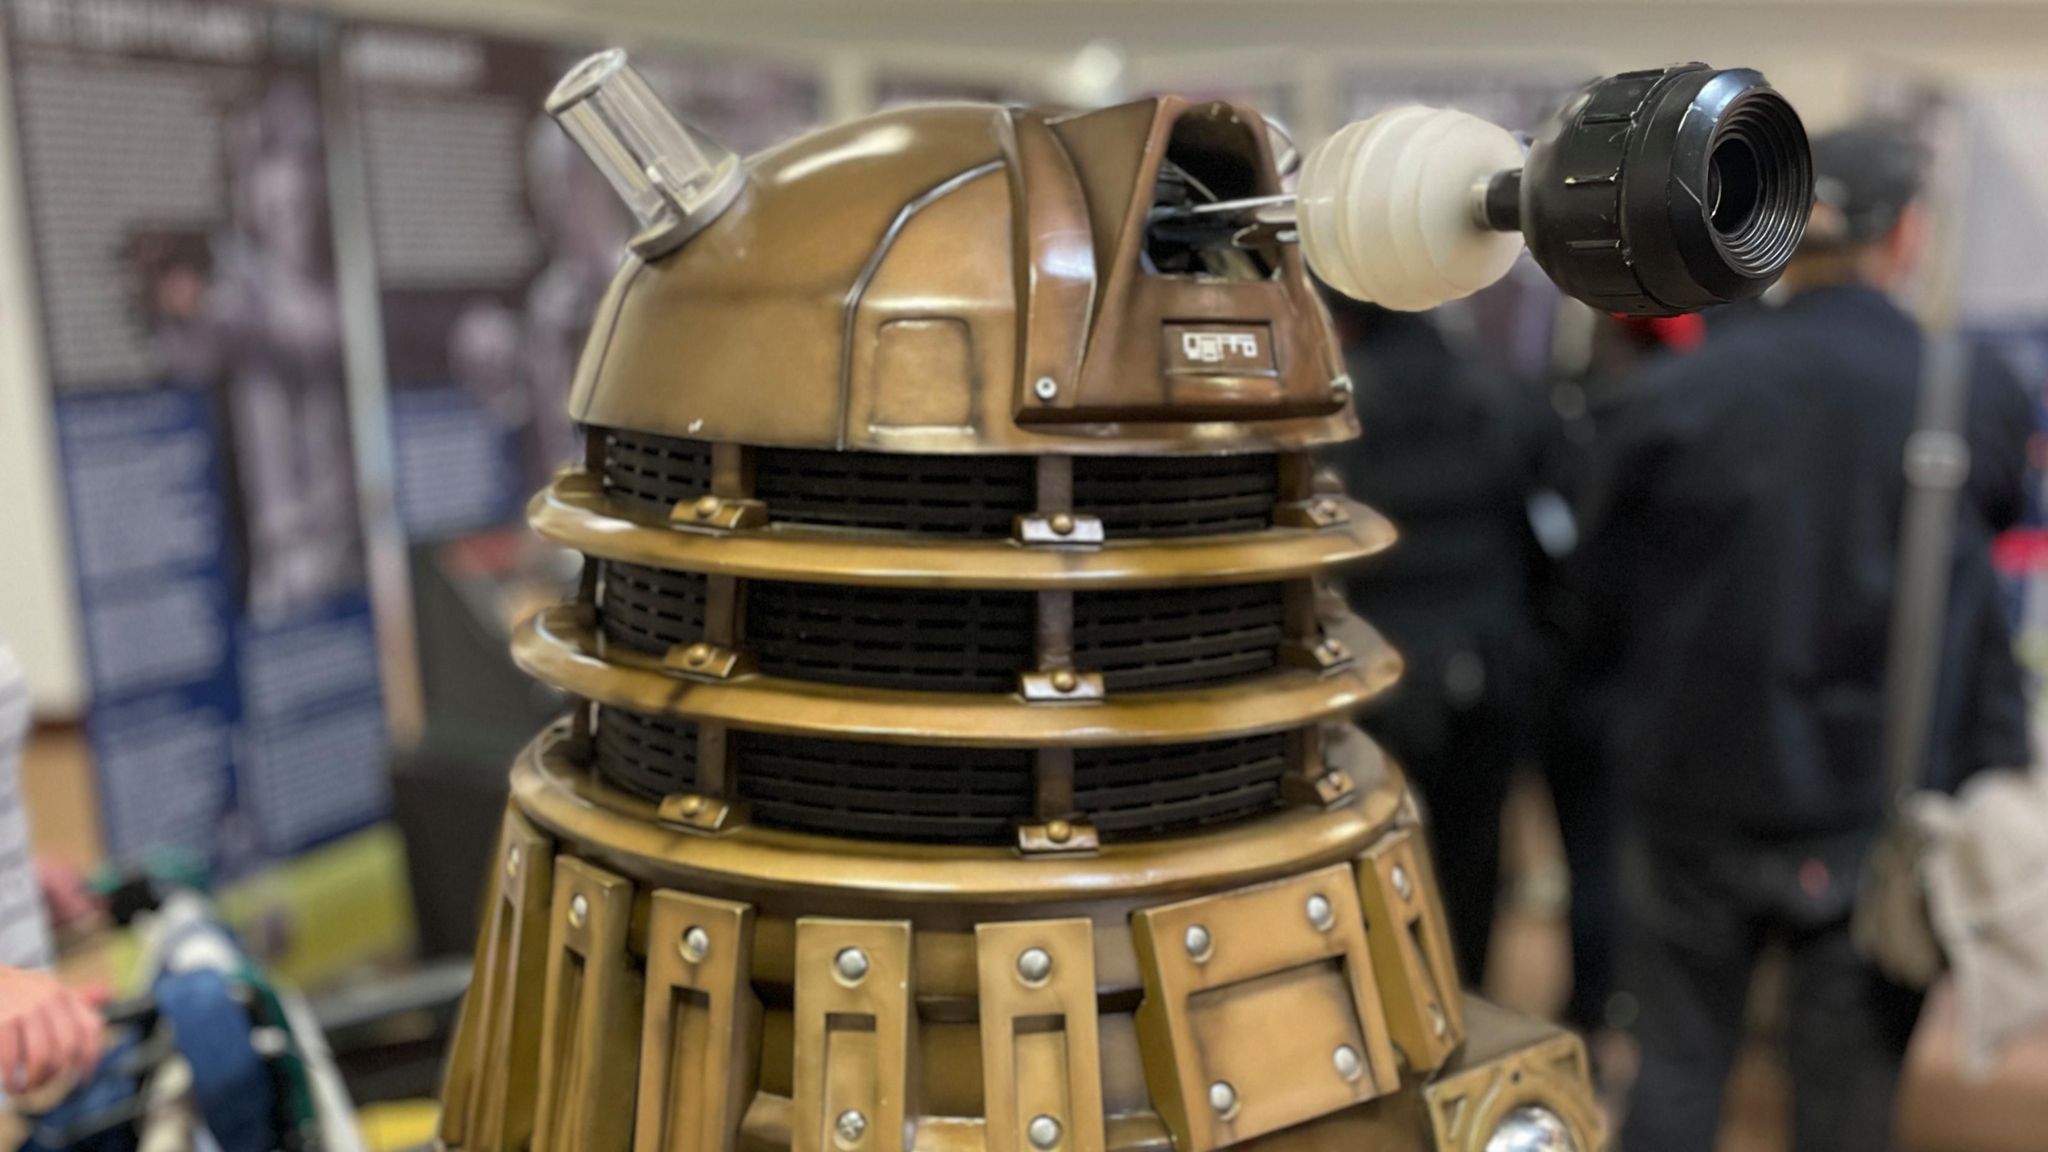 A Dalek on display at Bedford Who